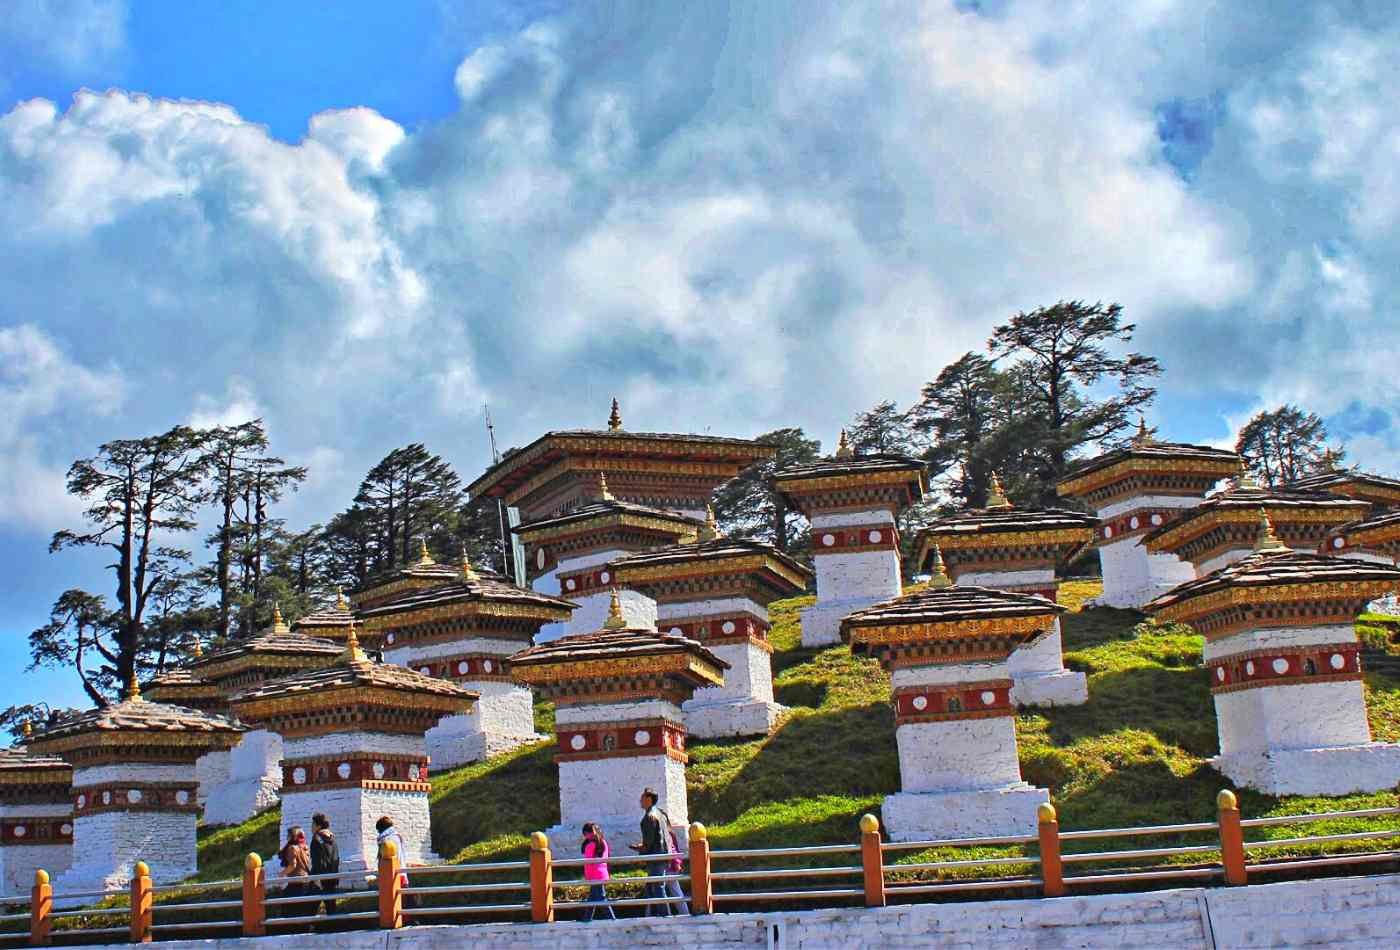 Dochu La Pass, a high mountain pass in Bhutan, featuring several small monuments built in memory of the soldiers who have served the country.